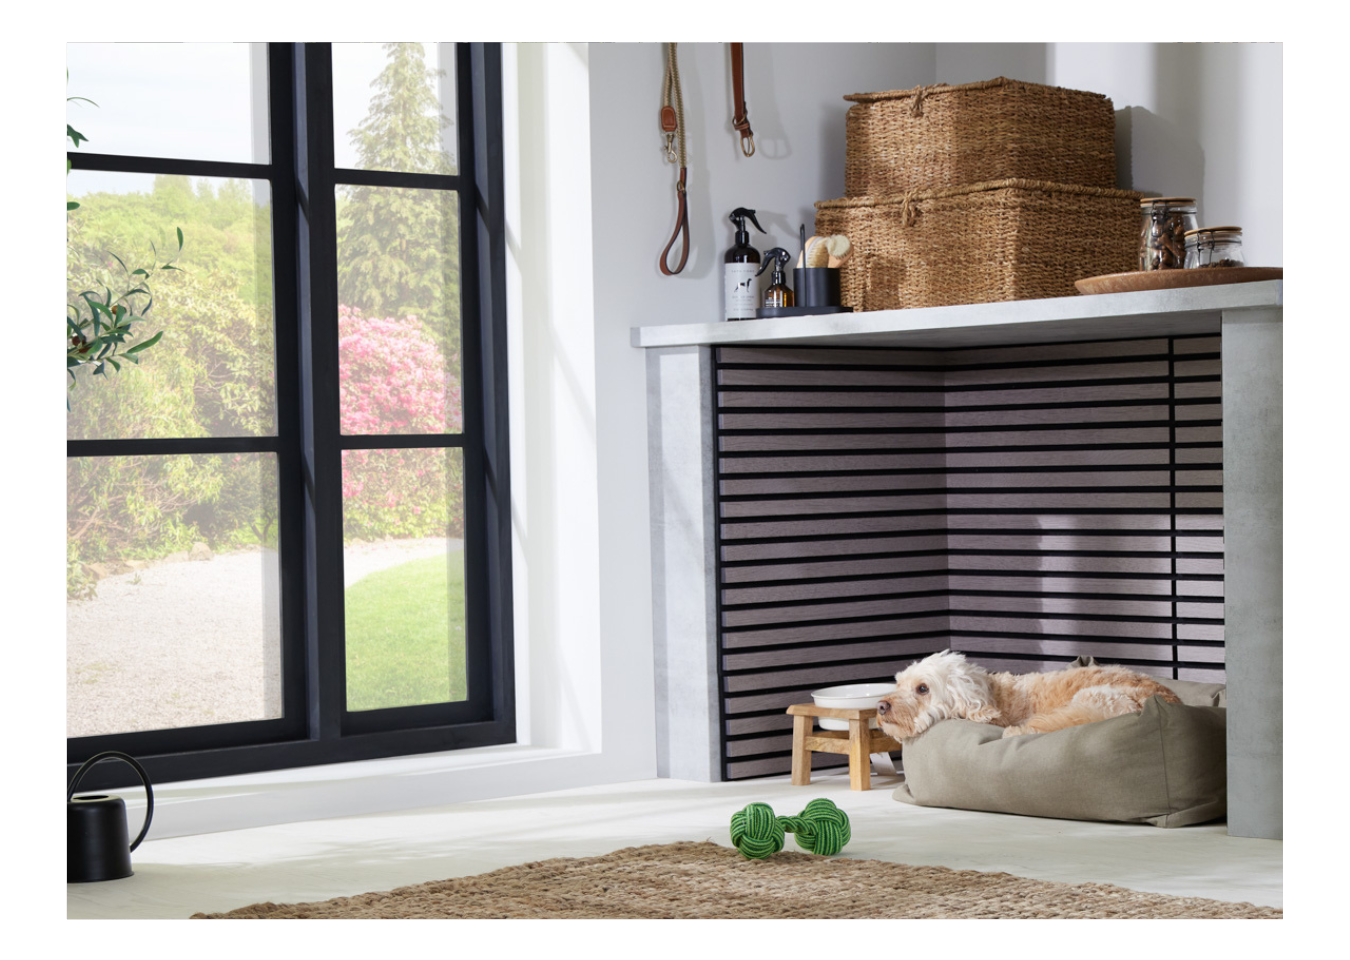 Biophilic design utility room featuring a dog lying in a bed next to SlatWall Mini Grey Oak panels and large black windows.